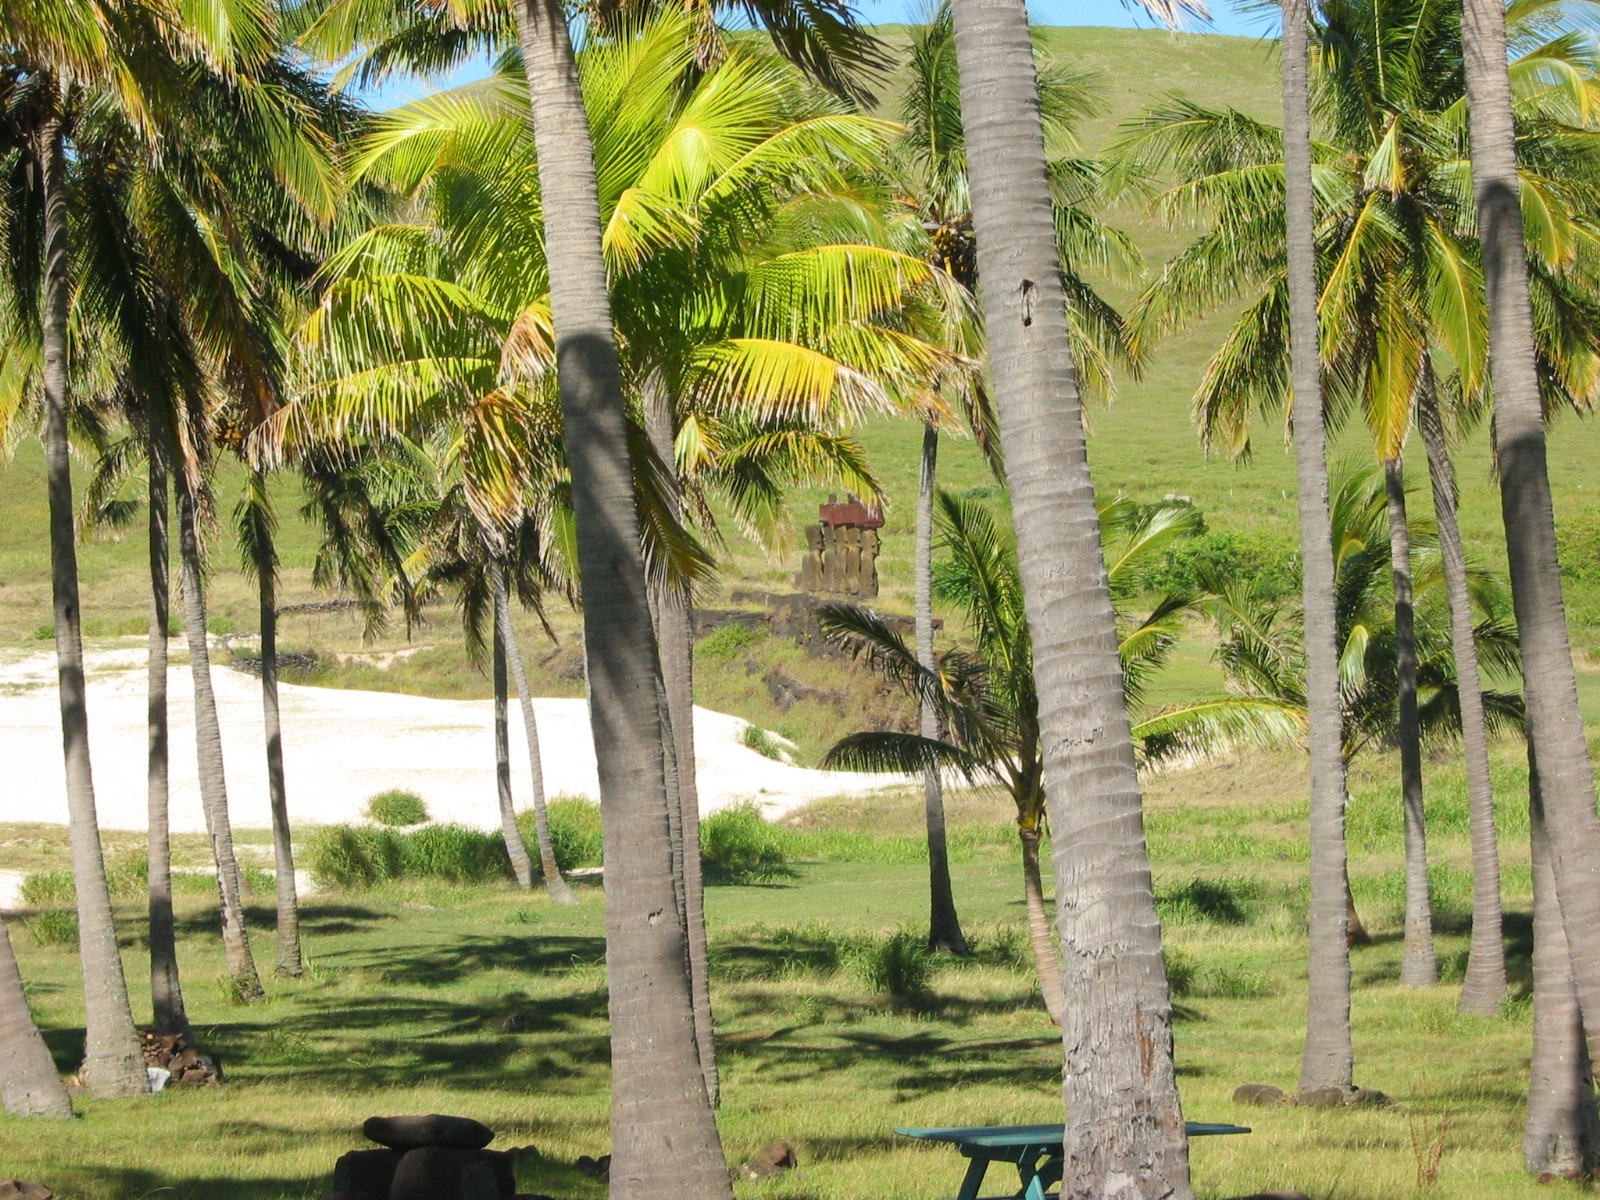 a cow is grazing under the palm trees